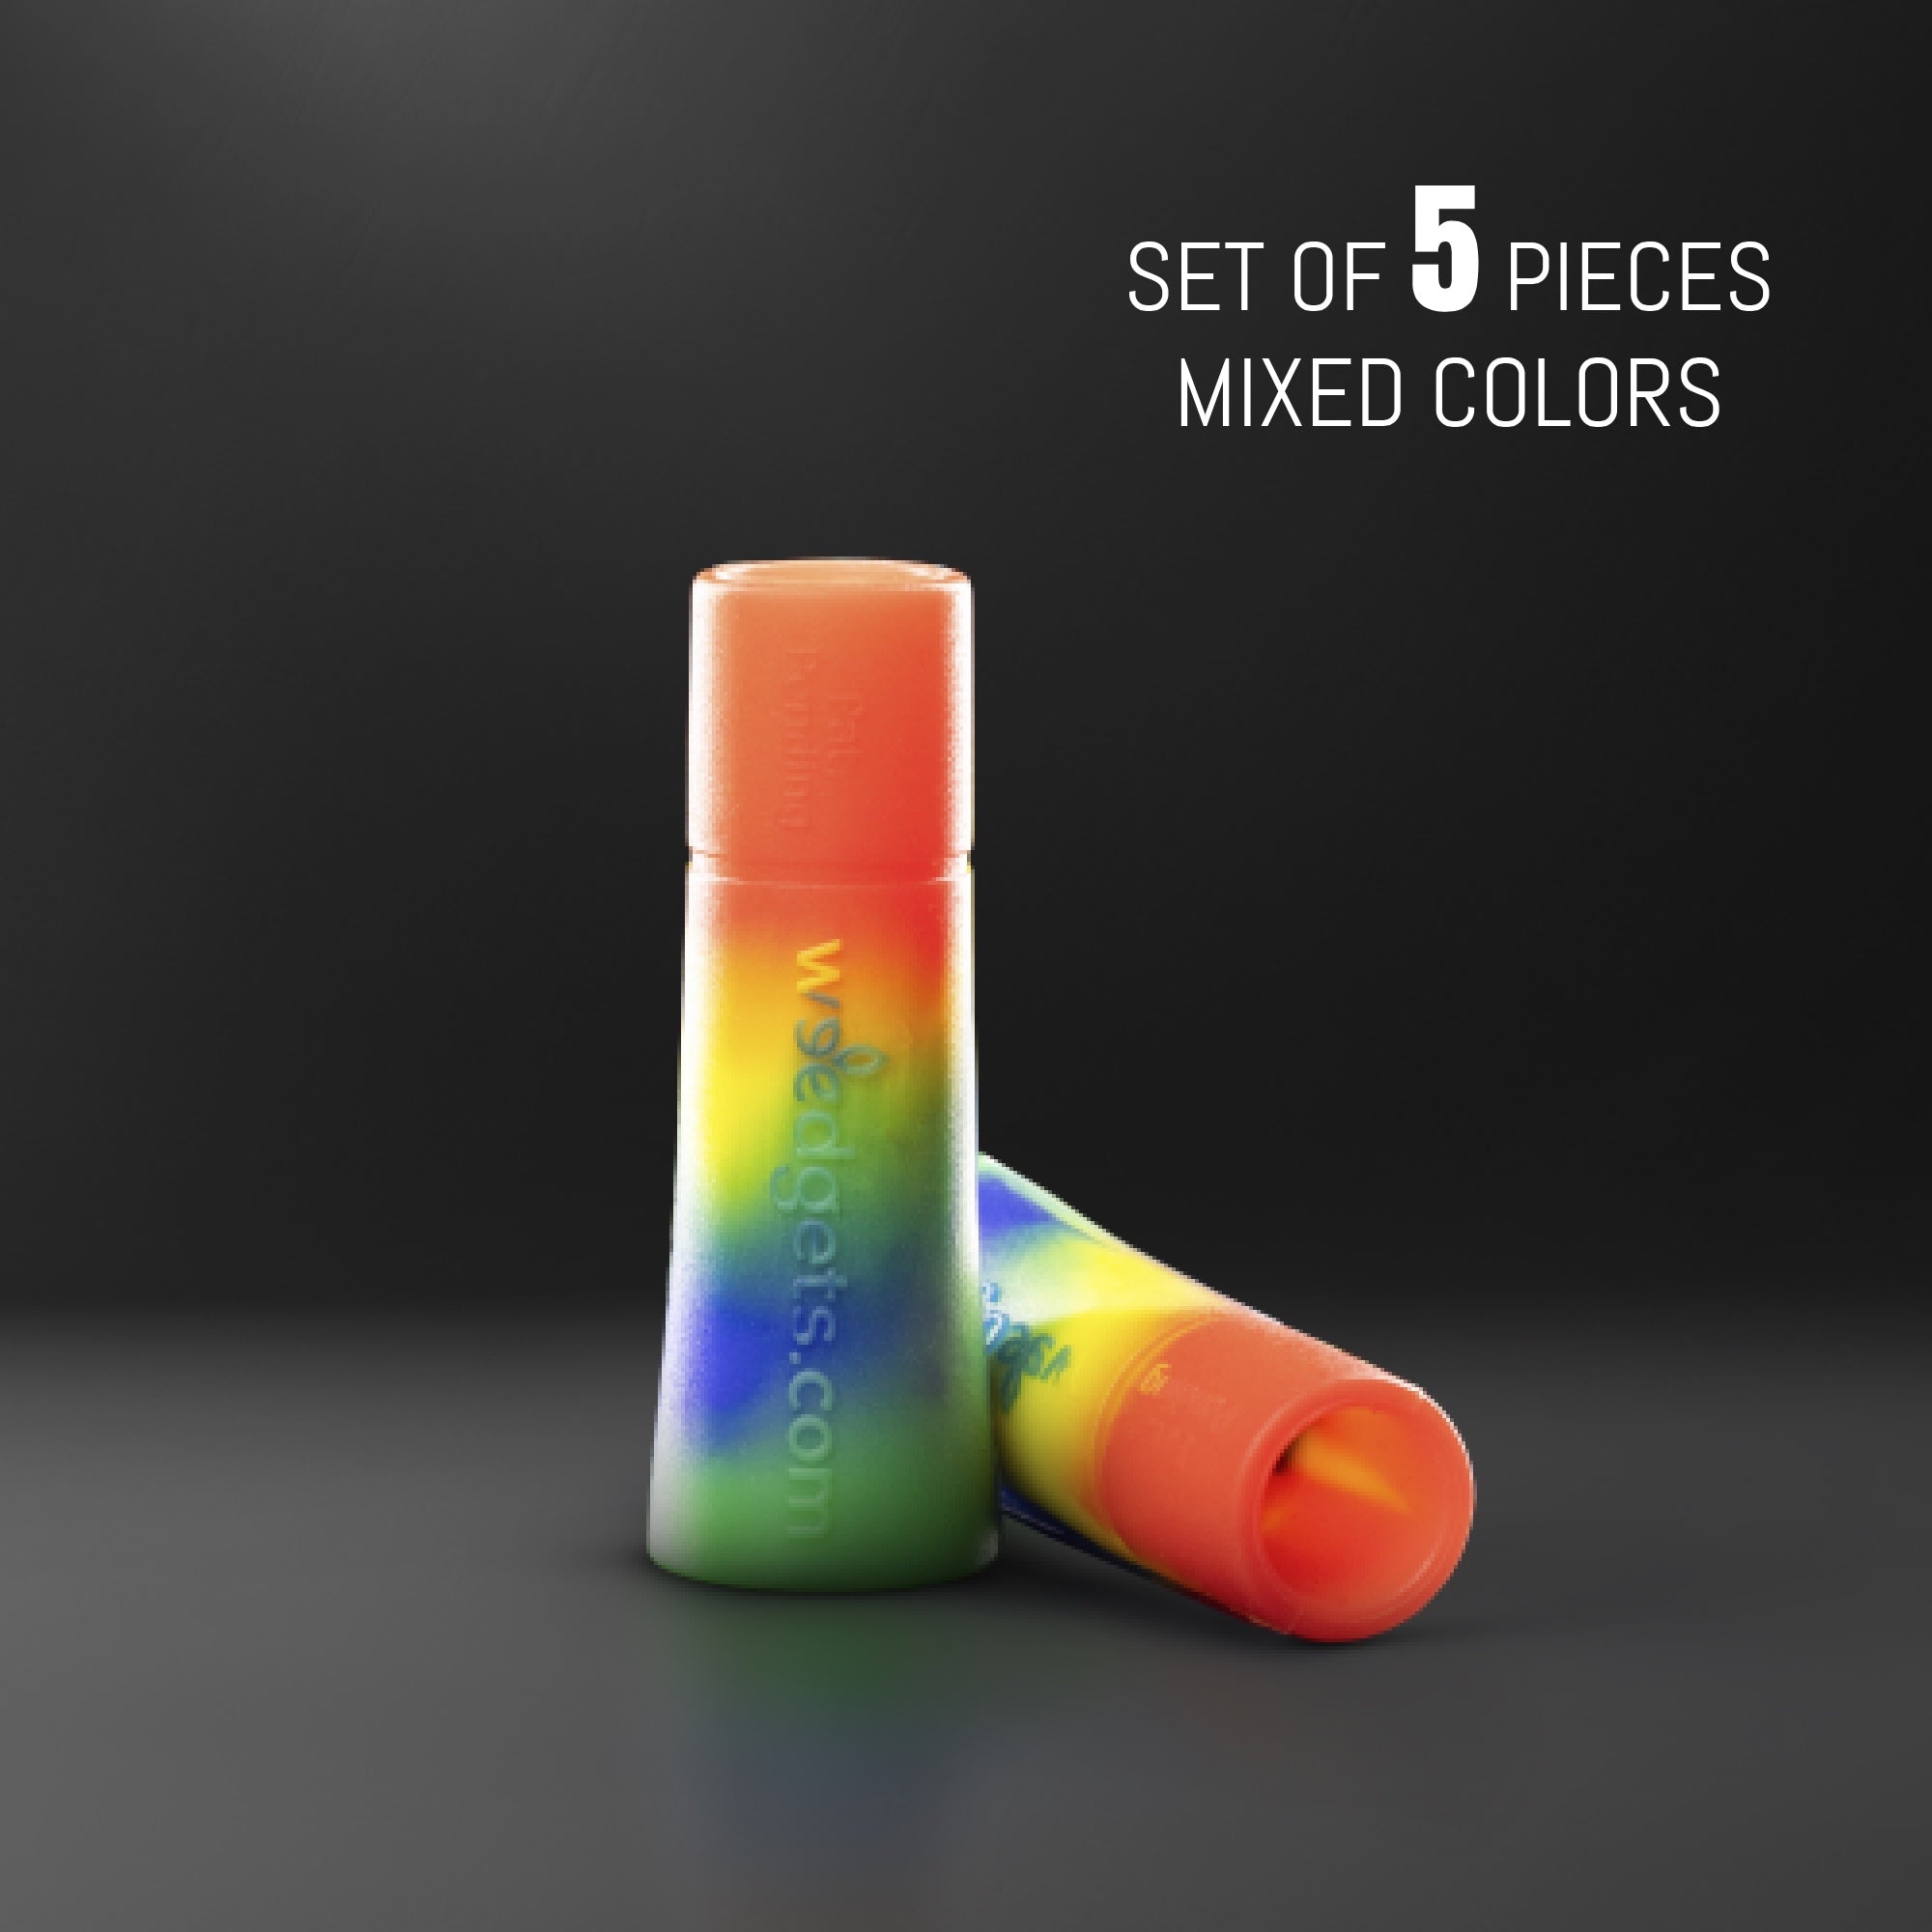 2 multi-colored, small tic-toke joint filter tips